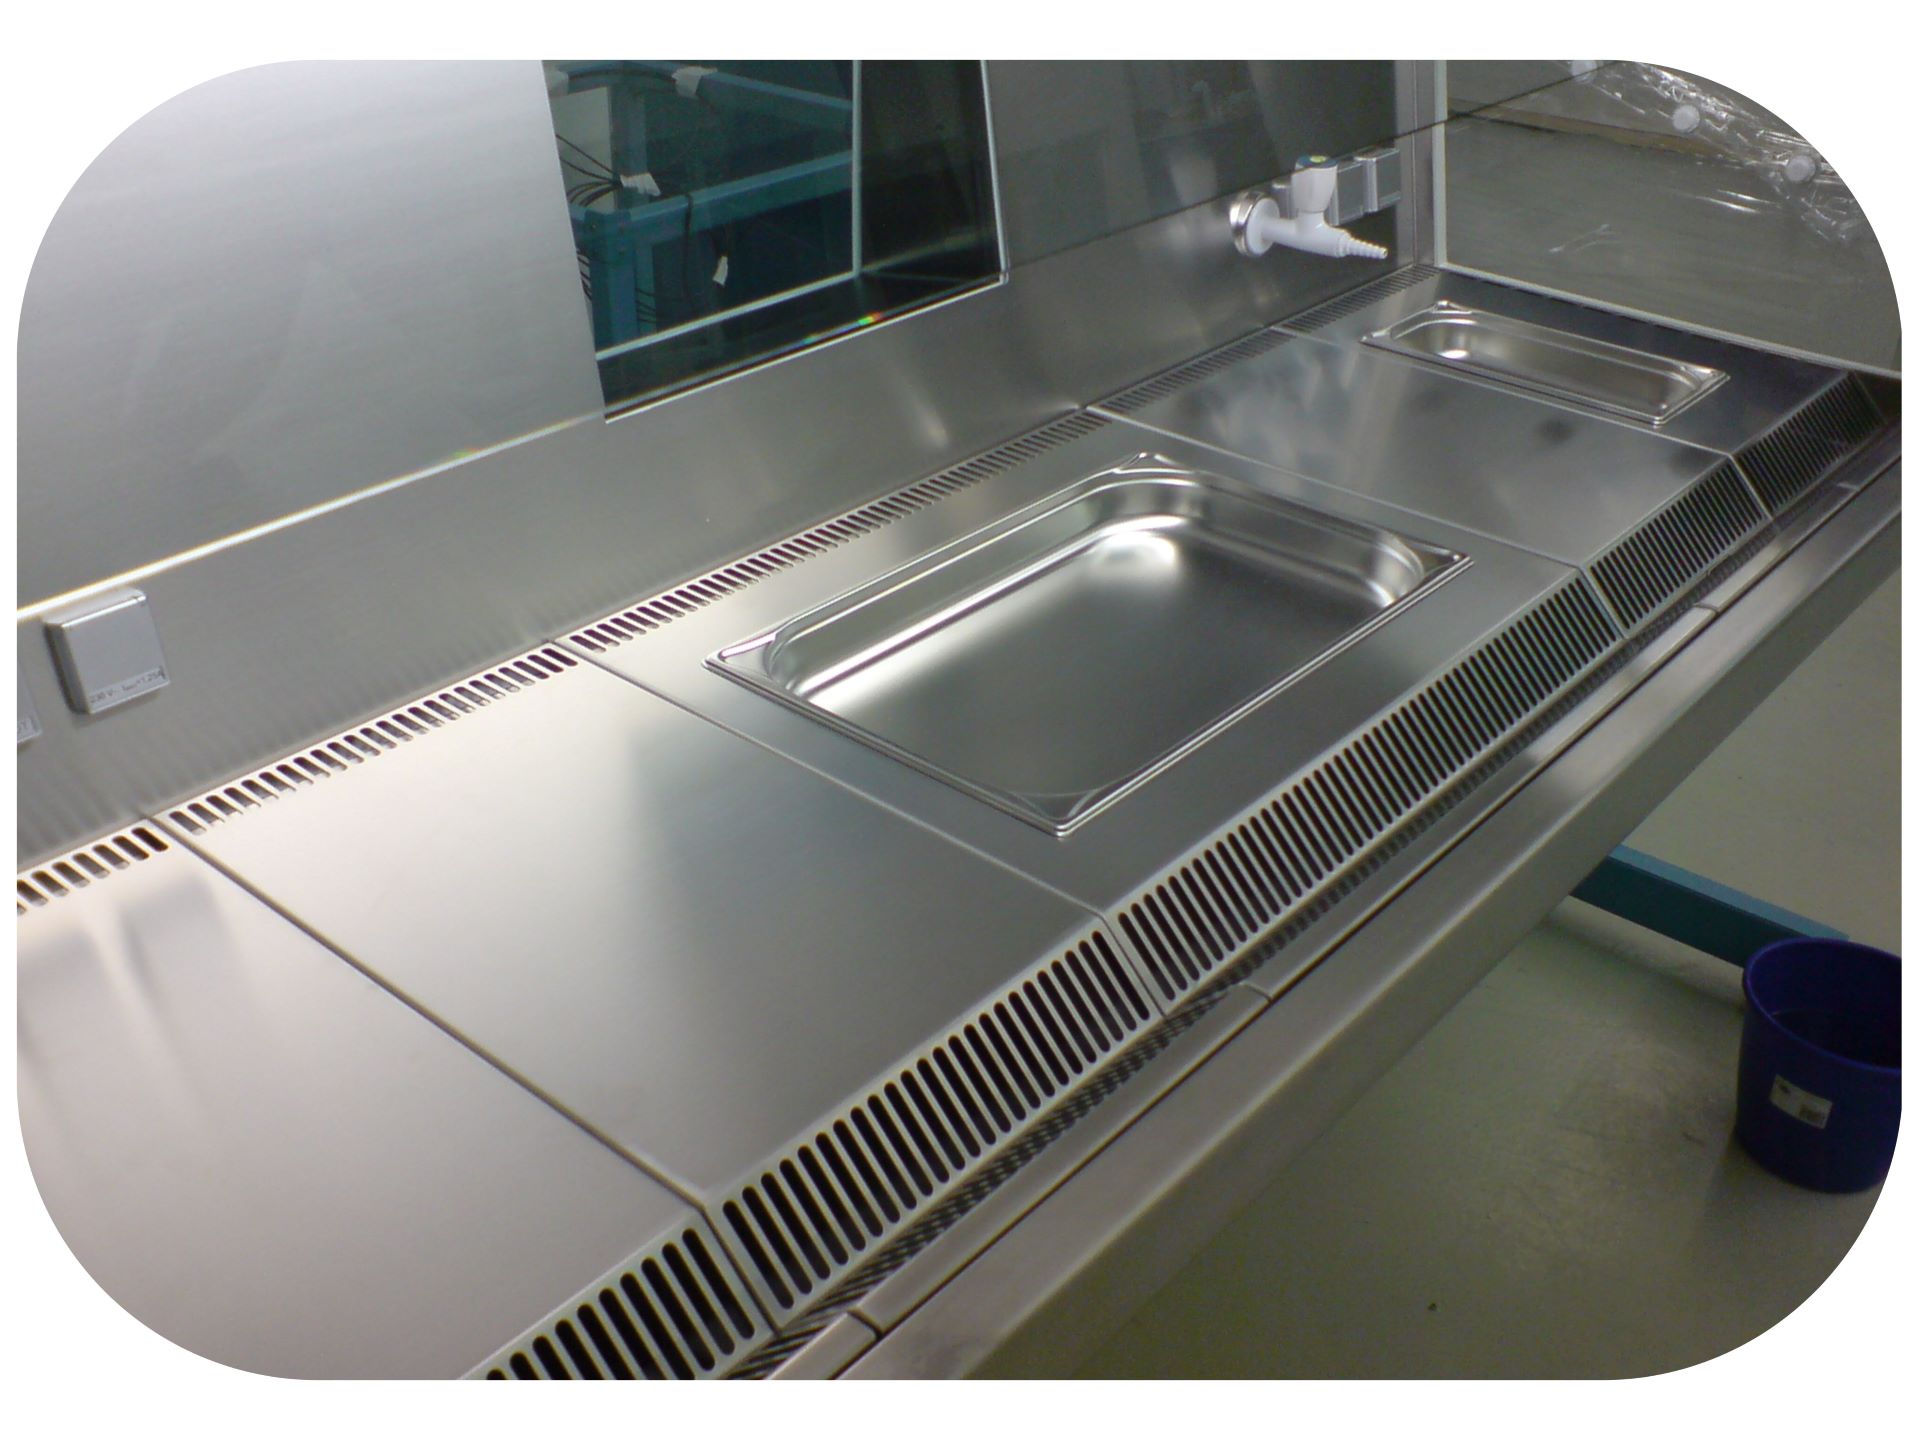 Integrated sinks in worktops in the safety cabinet